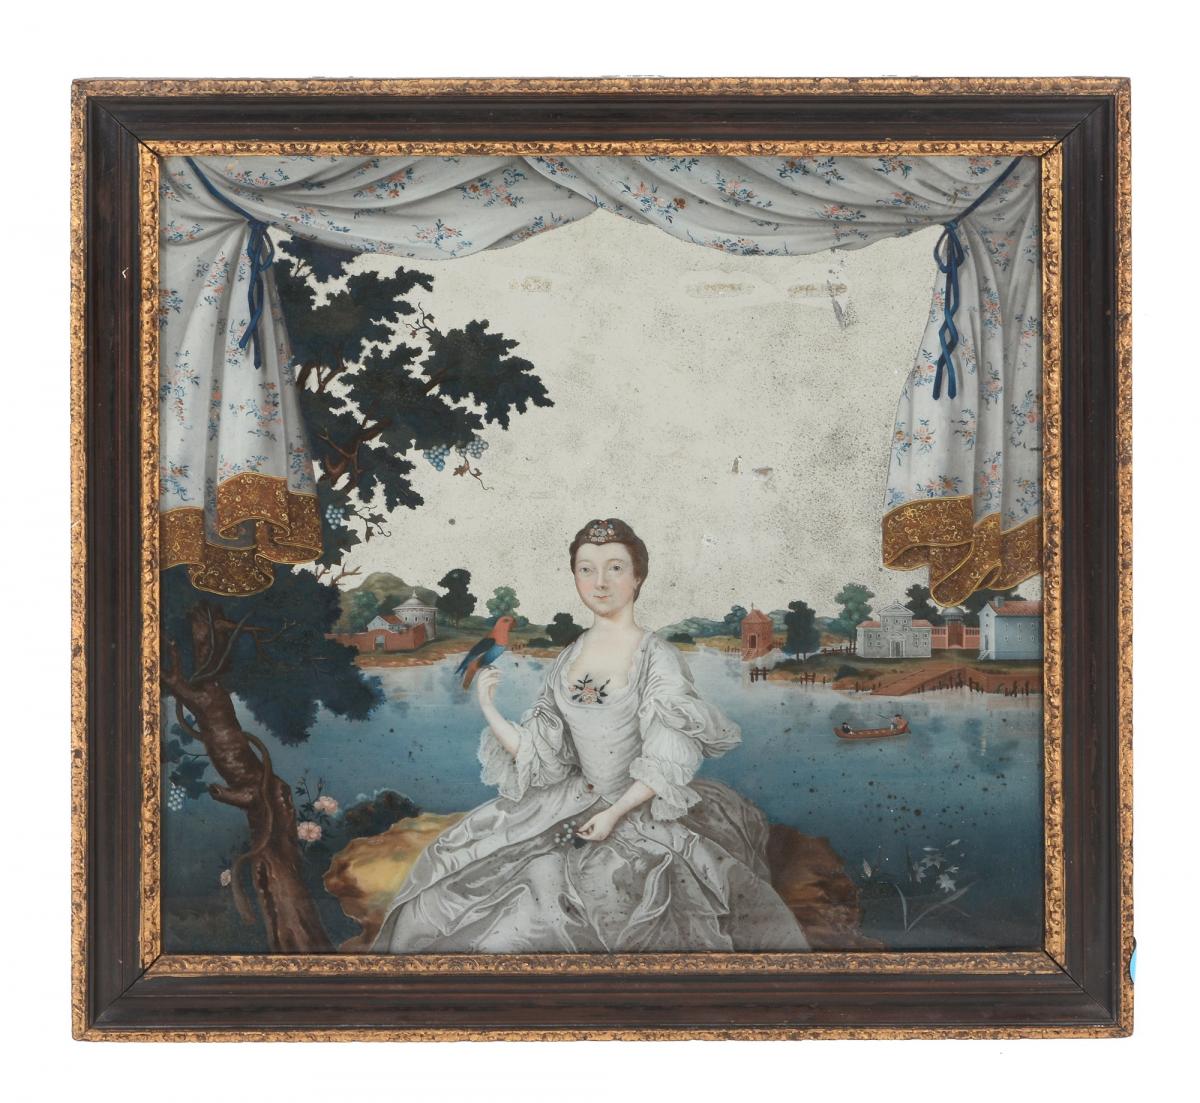 A Rare Chinese Export 'European-Subject' Reverse Glass Painting | BADA